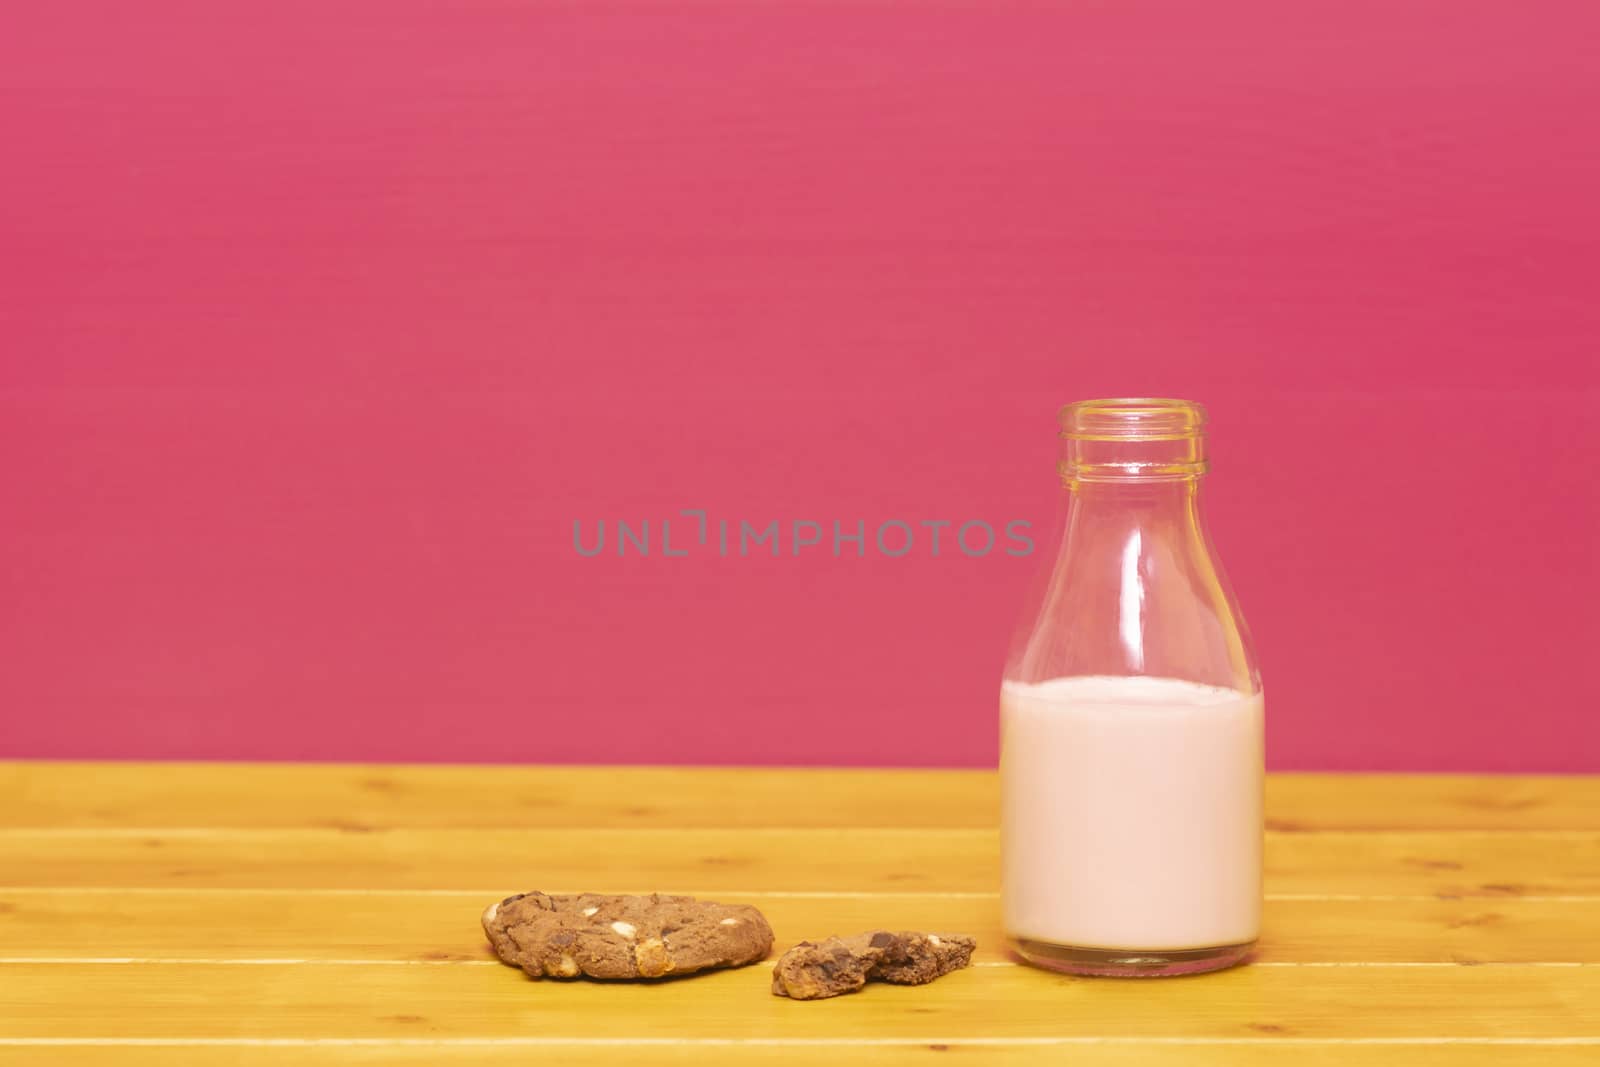 One-third pint glass milk bottle half full with strawberry milkshake and a half-eaten chocolate chip cookie, on a wooden table against a pink background